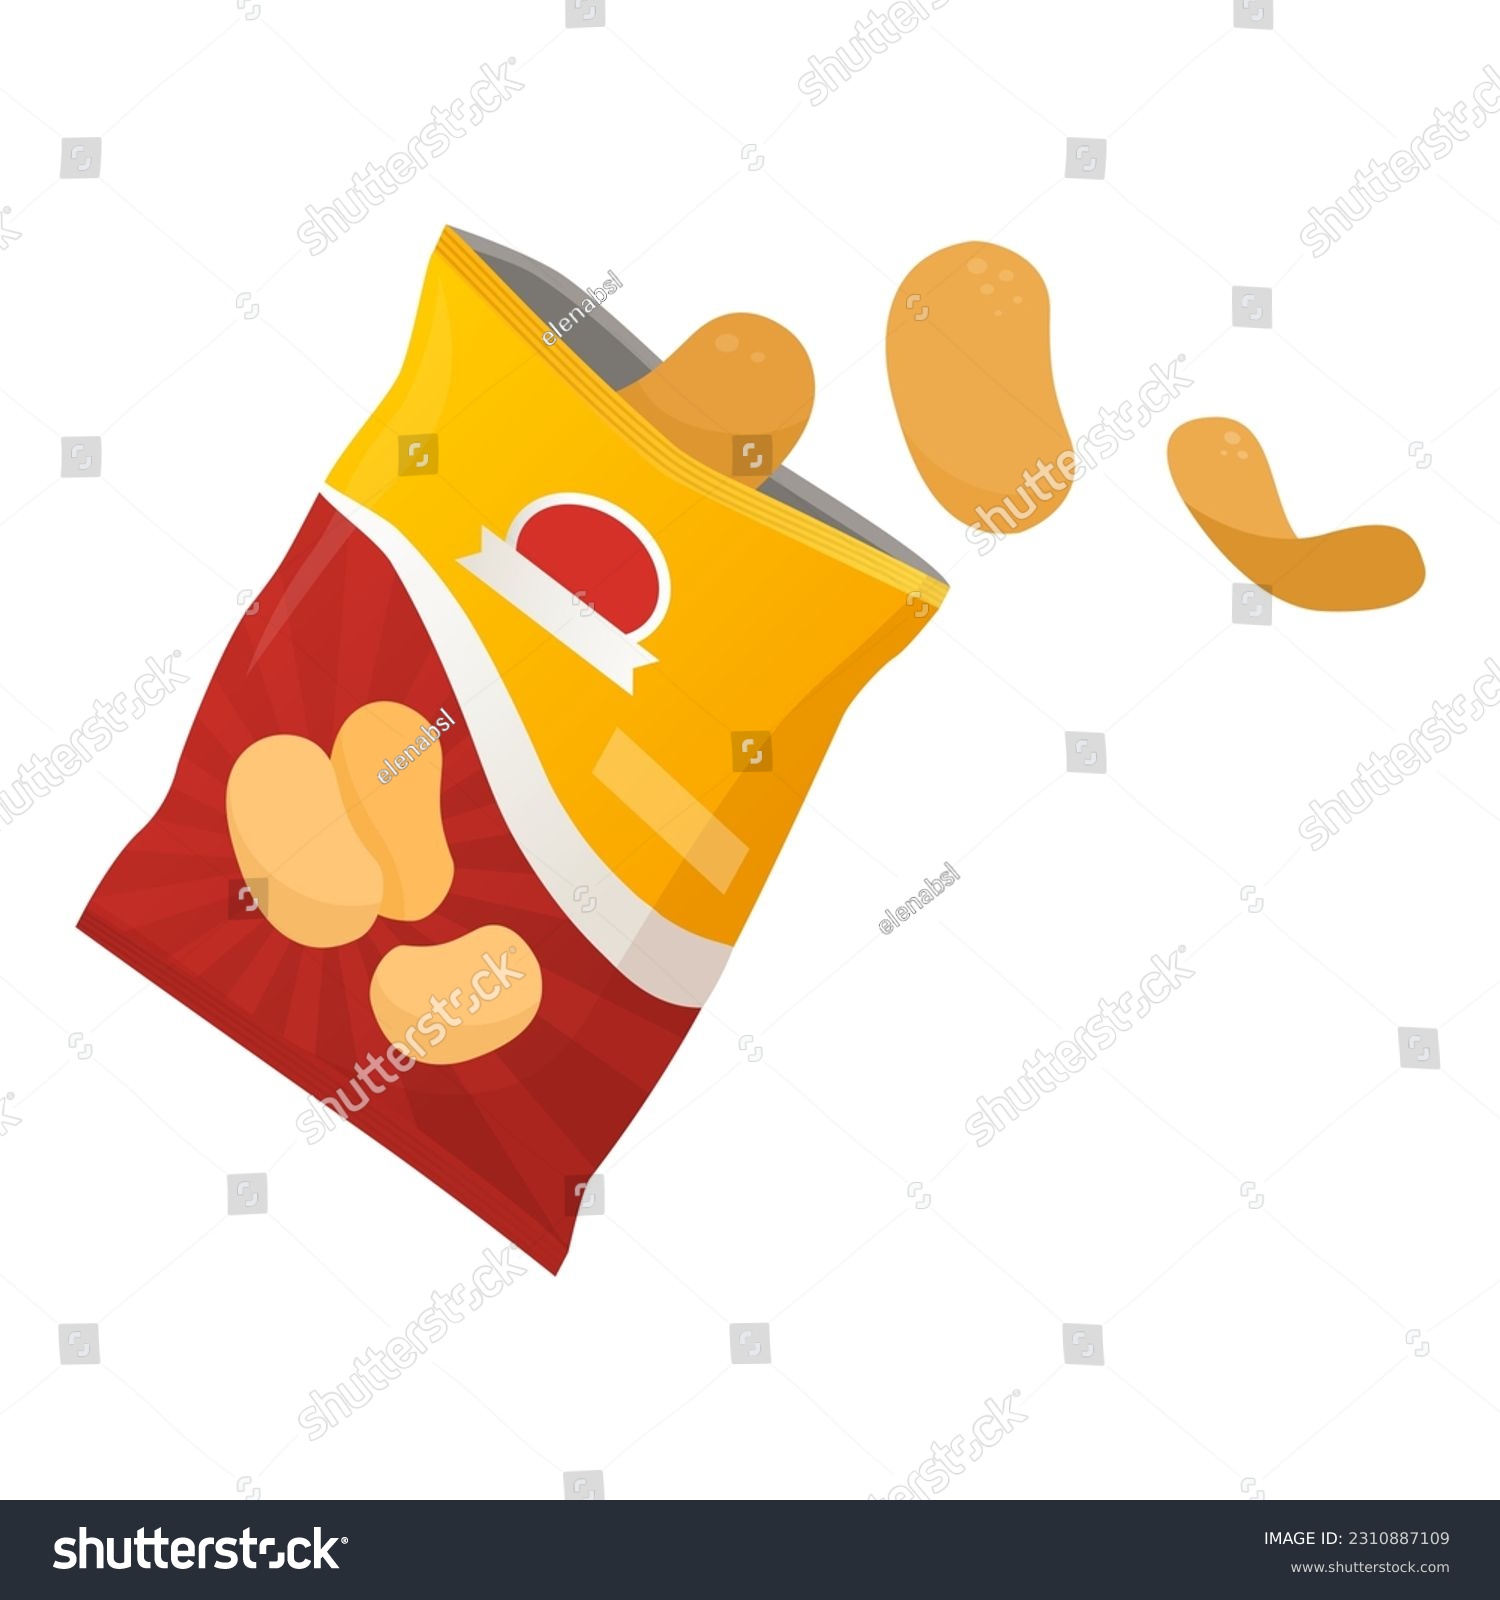 Open bag of chips and chips falling out, snacks concept #2310887109